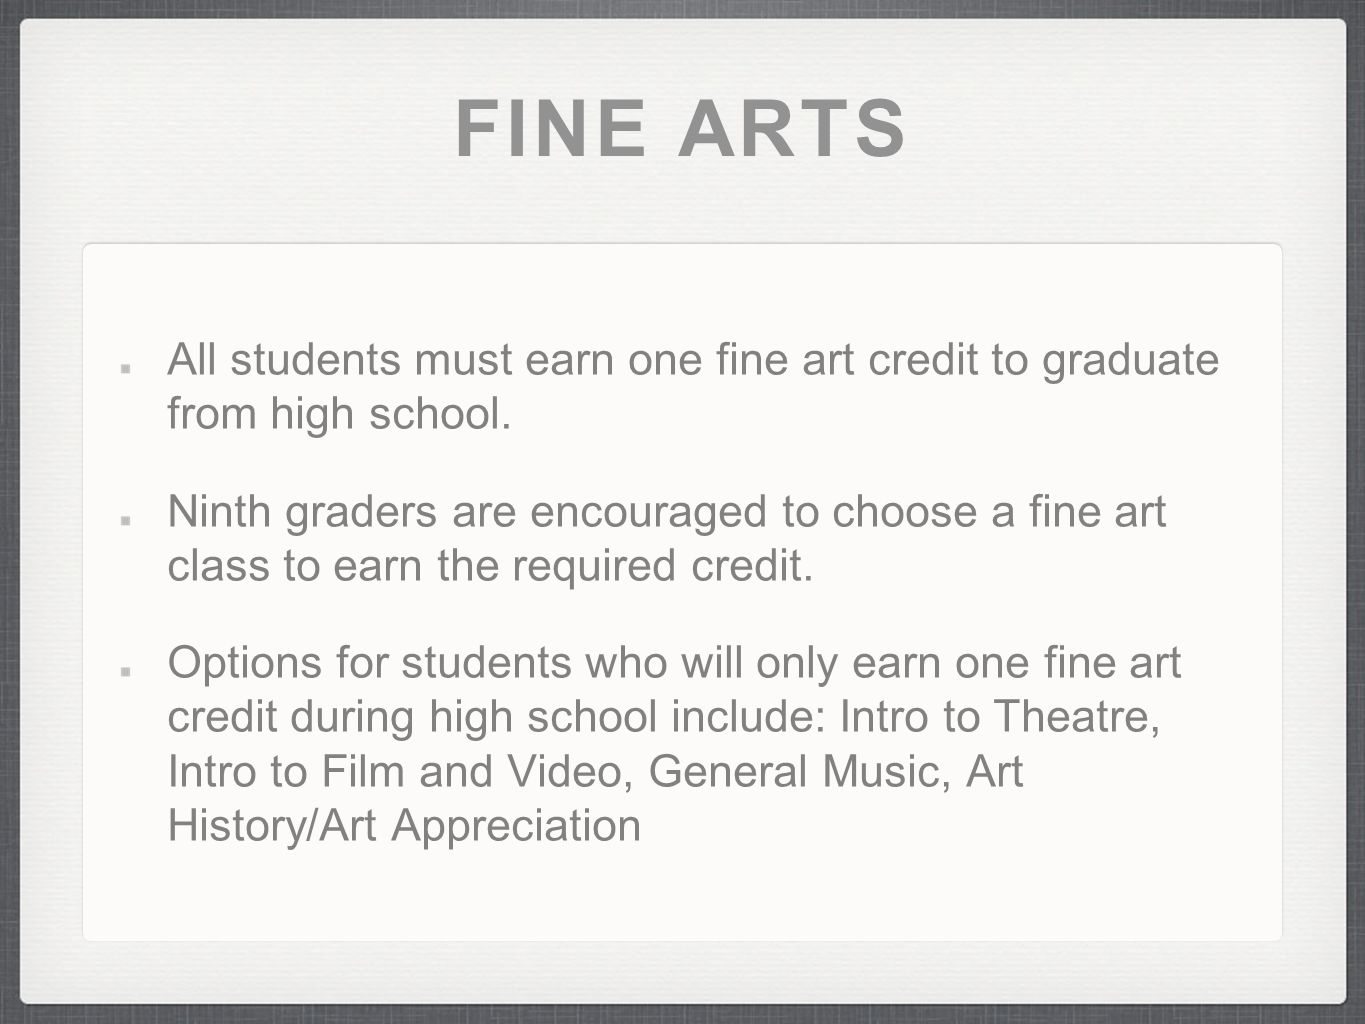 FINE ARTS All students must earn one fine art credit to graduate from high school.